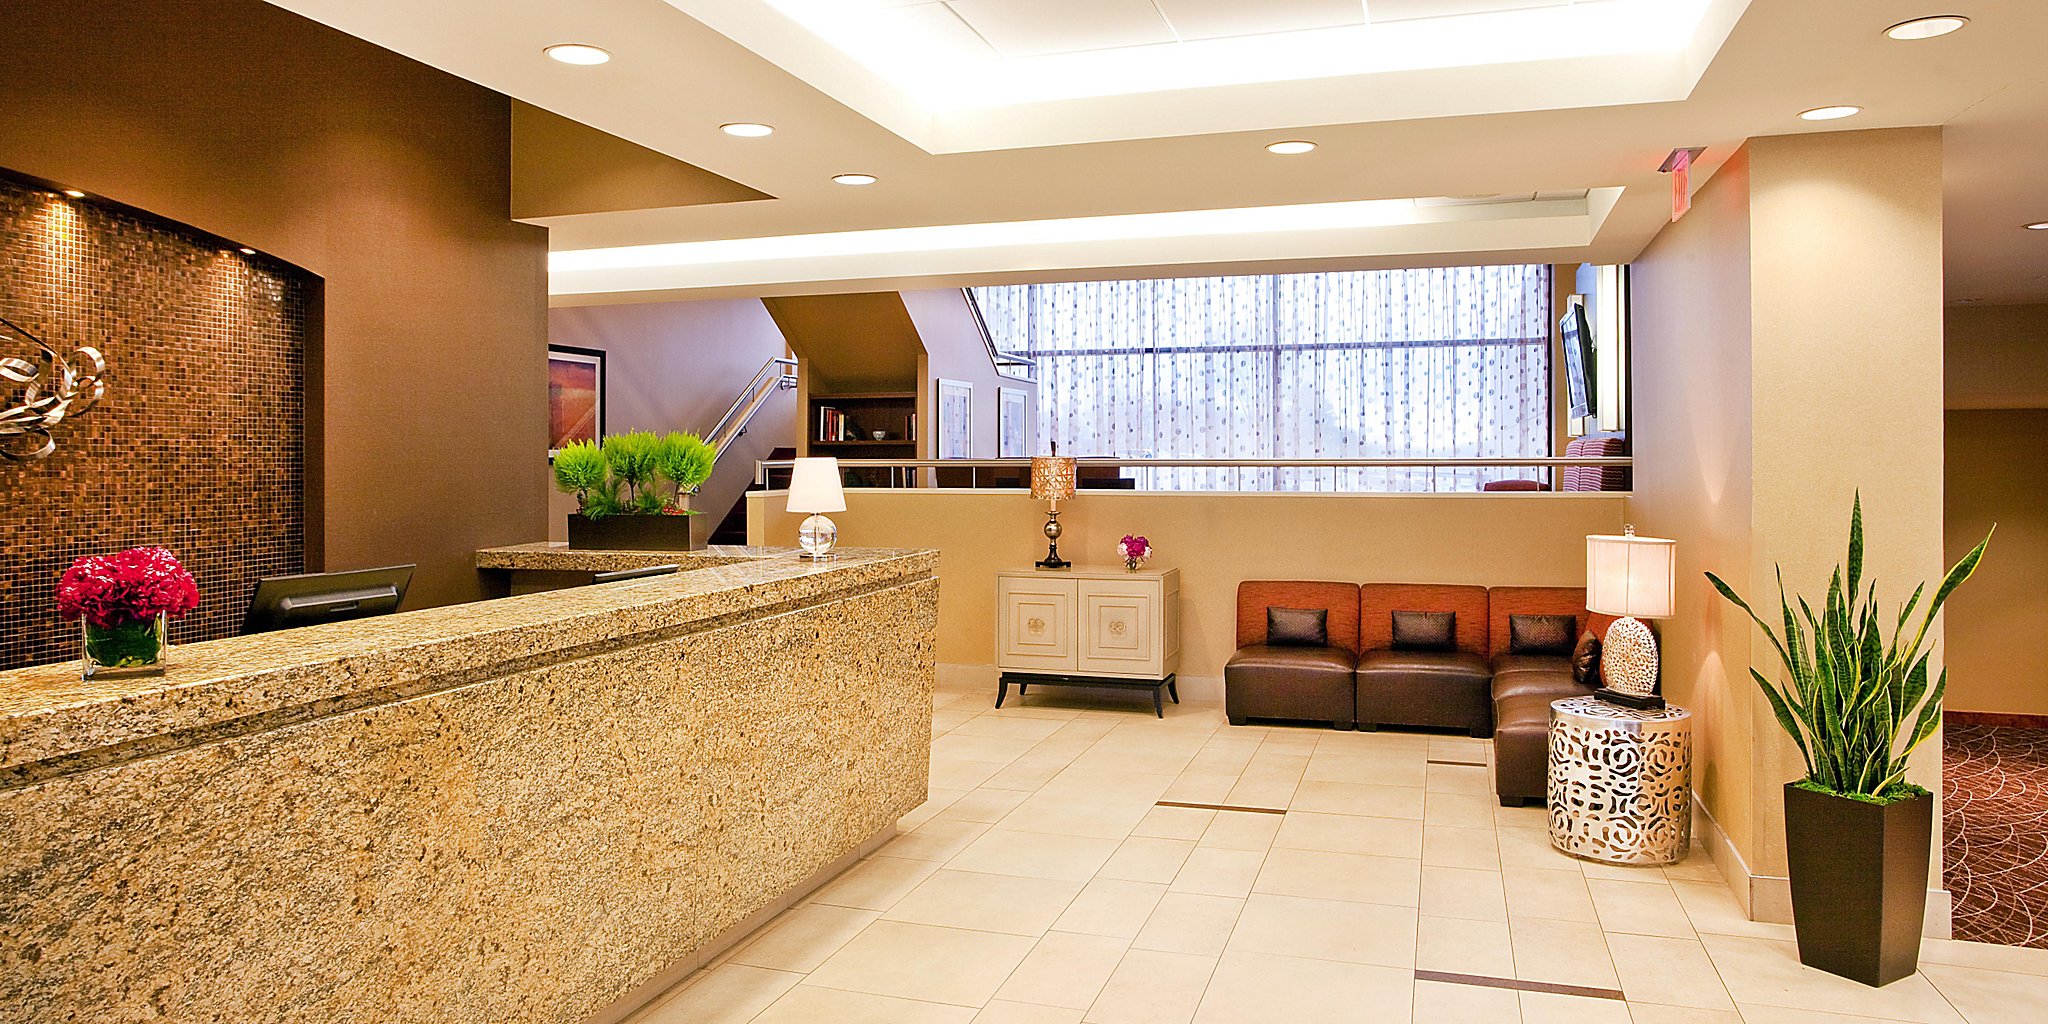 Luxury Hotels Near Boston College With A Pool Crowne Plaza